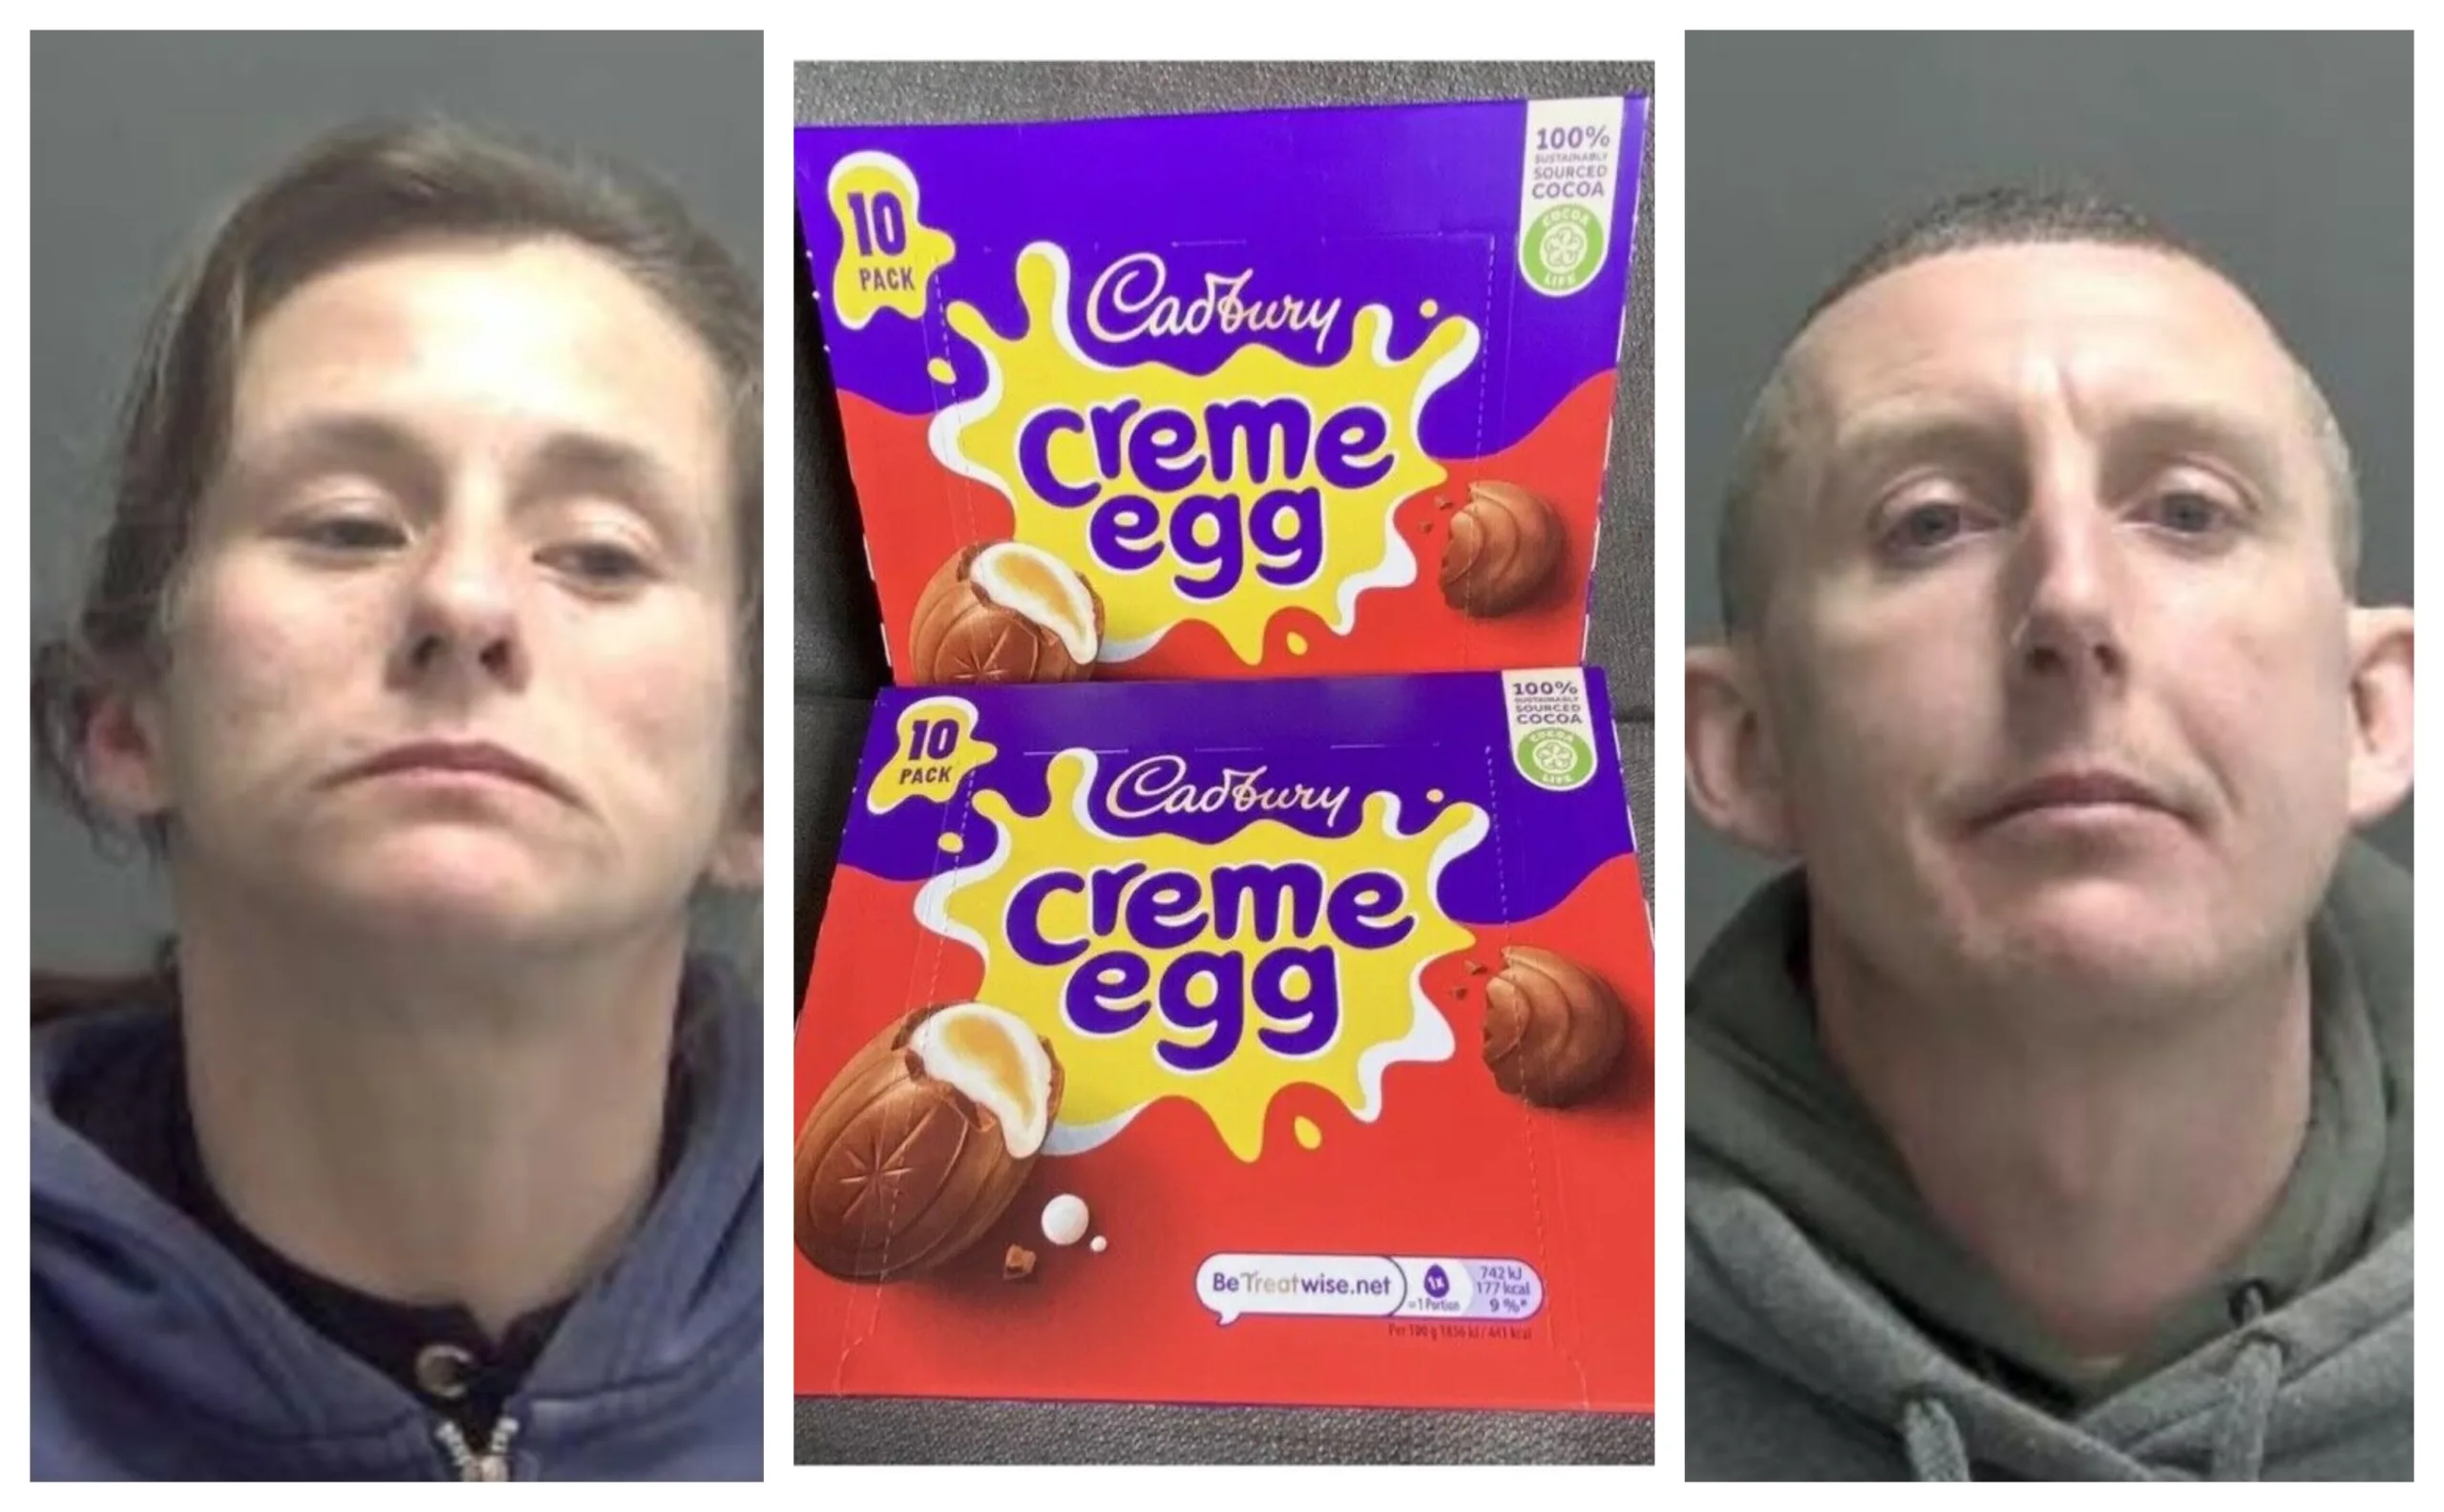 McSpadden (right) was in breach of a Criminal Behaviour Order (CBO) when he went into Tesco with Momot (left) and stole crème eggs worth £59.40